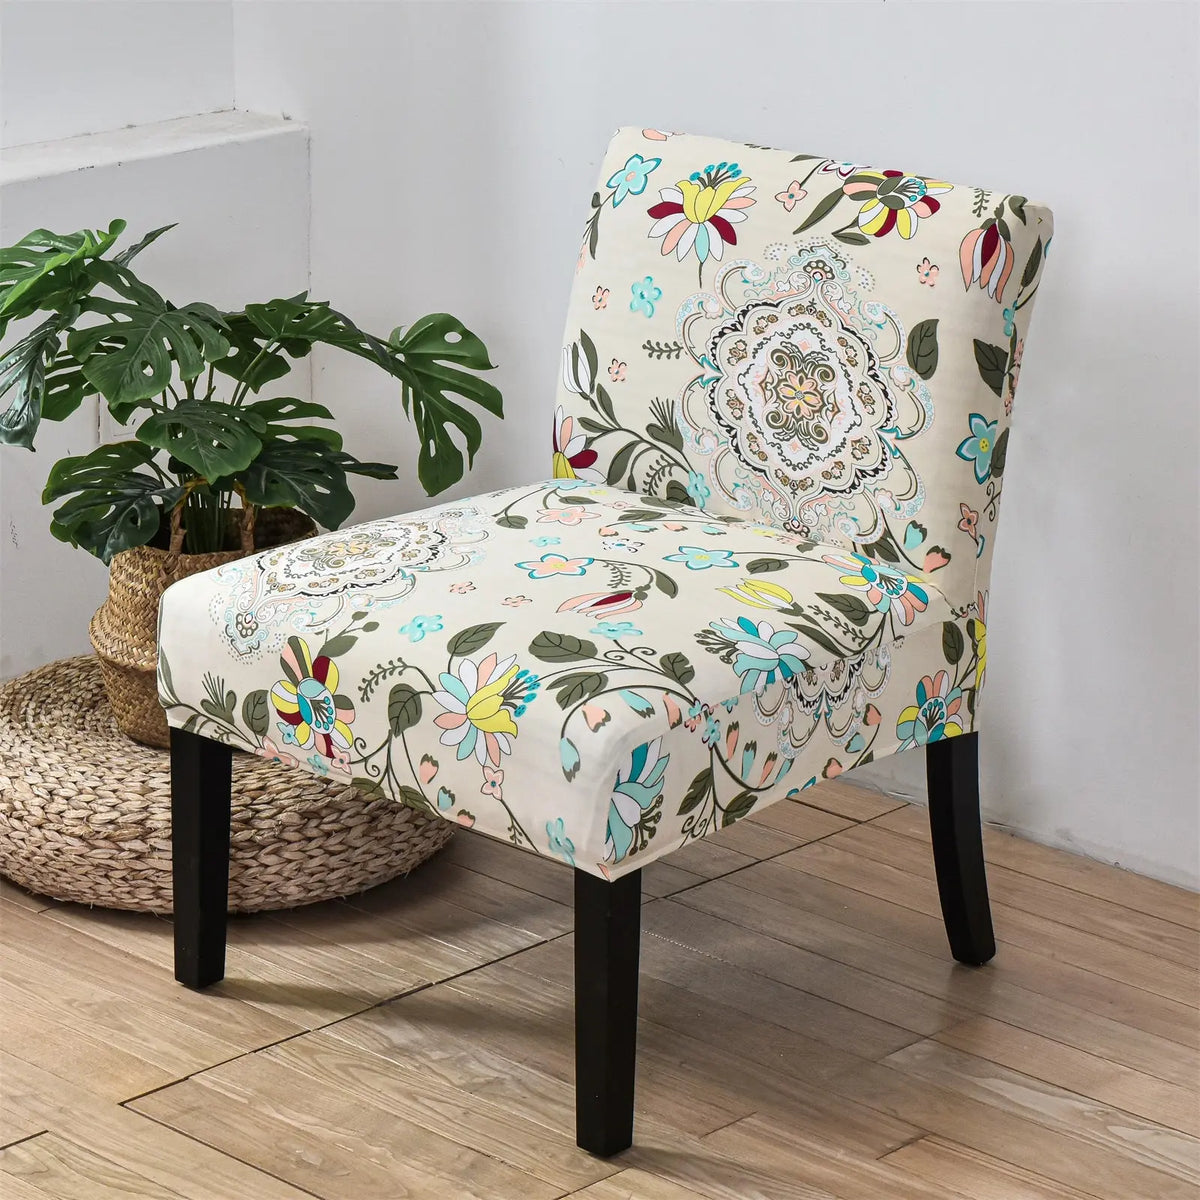 Floral Printed Armless Chair Cover Slipcover Modern Accent Stretch Chair Covers Elastic Couch Protector Cover Crfatop %sku%